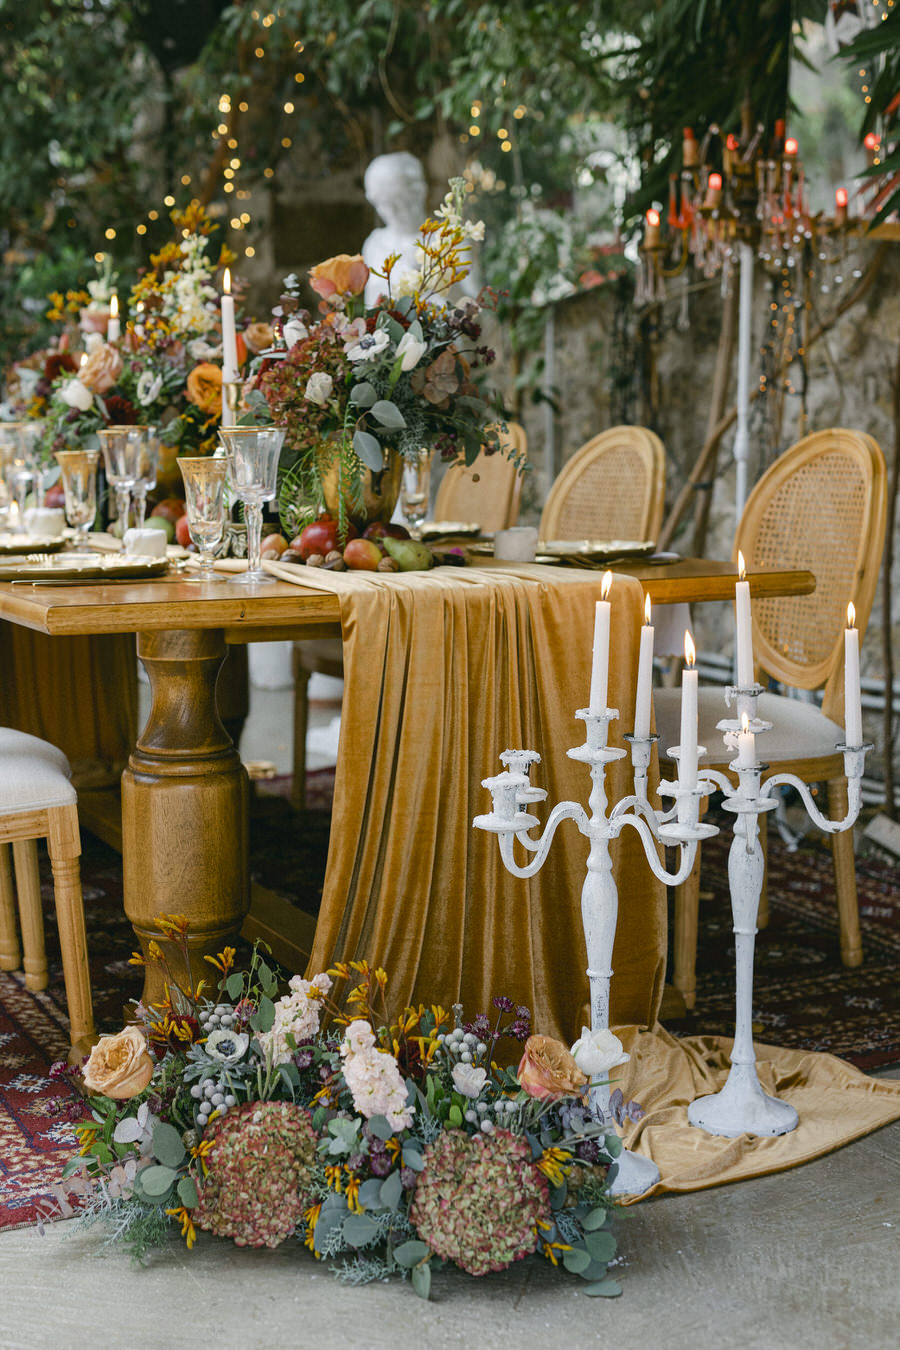 Baroque Inspired Wedding Editorial at Indoor Industrial Art Space by Fiorello Photography